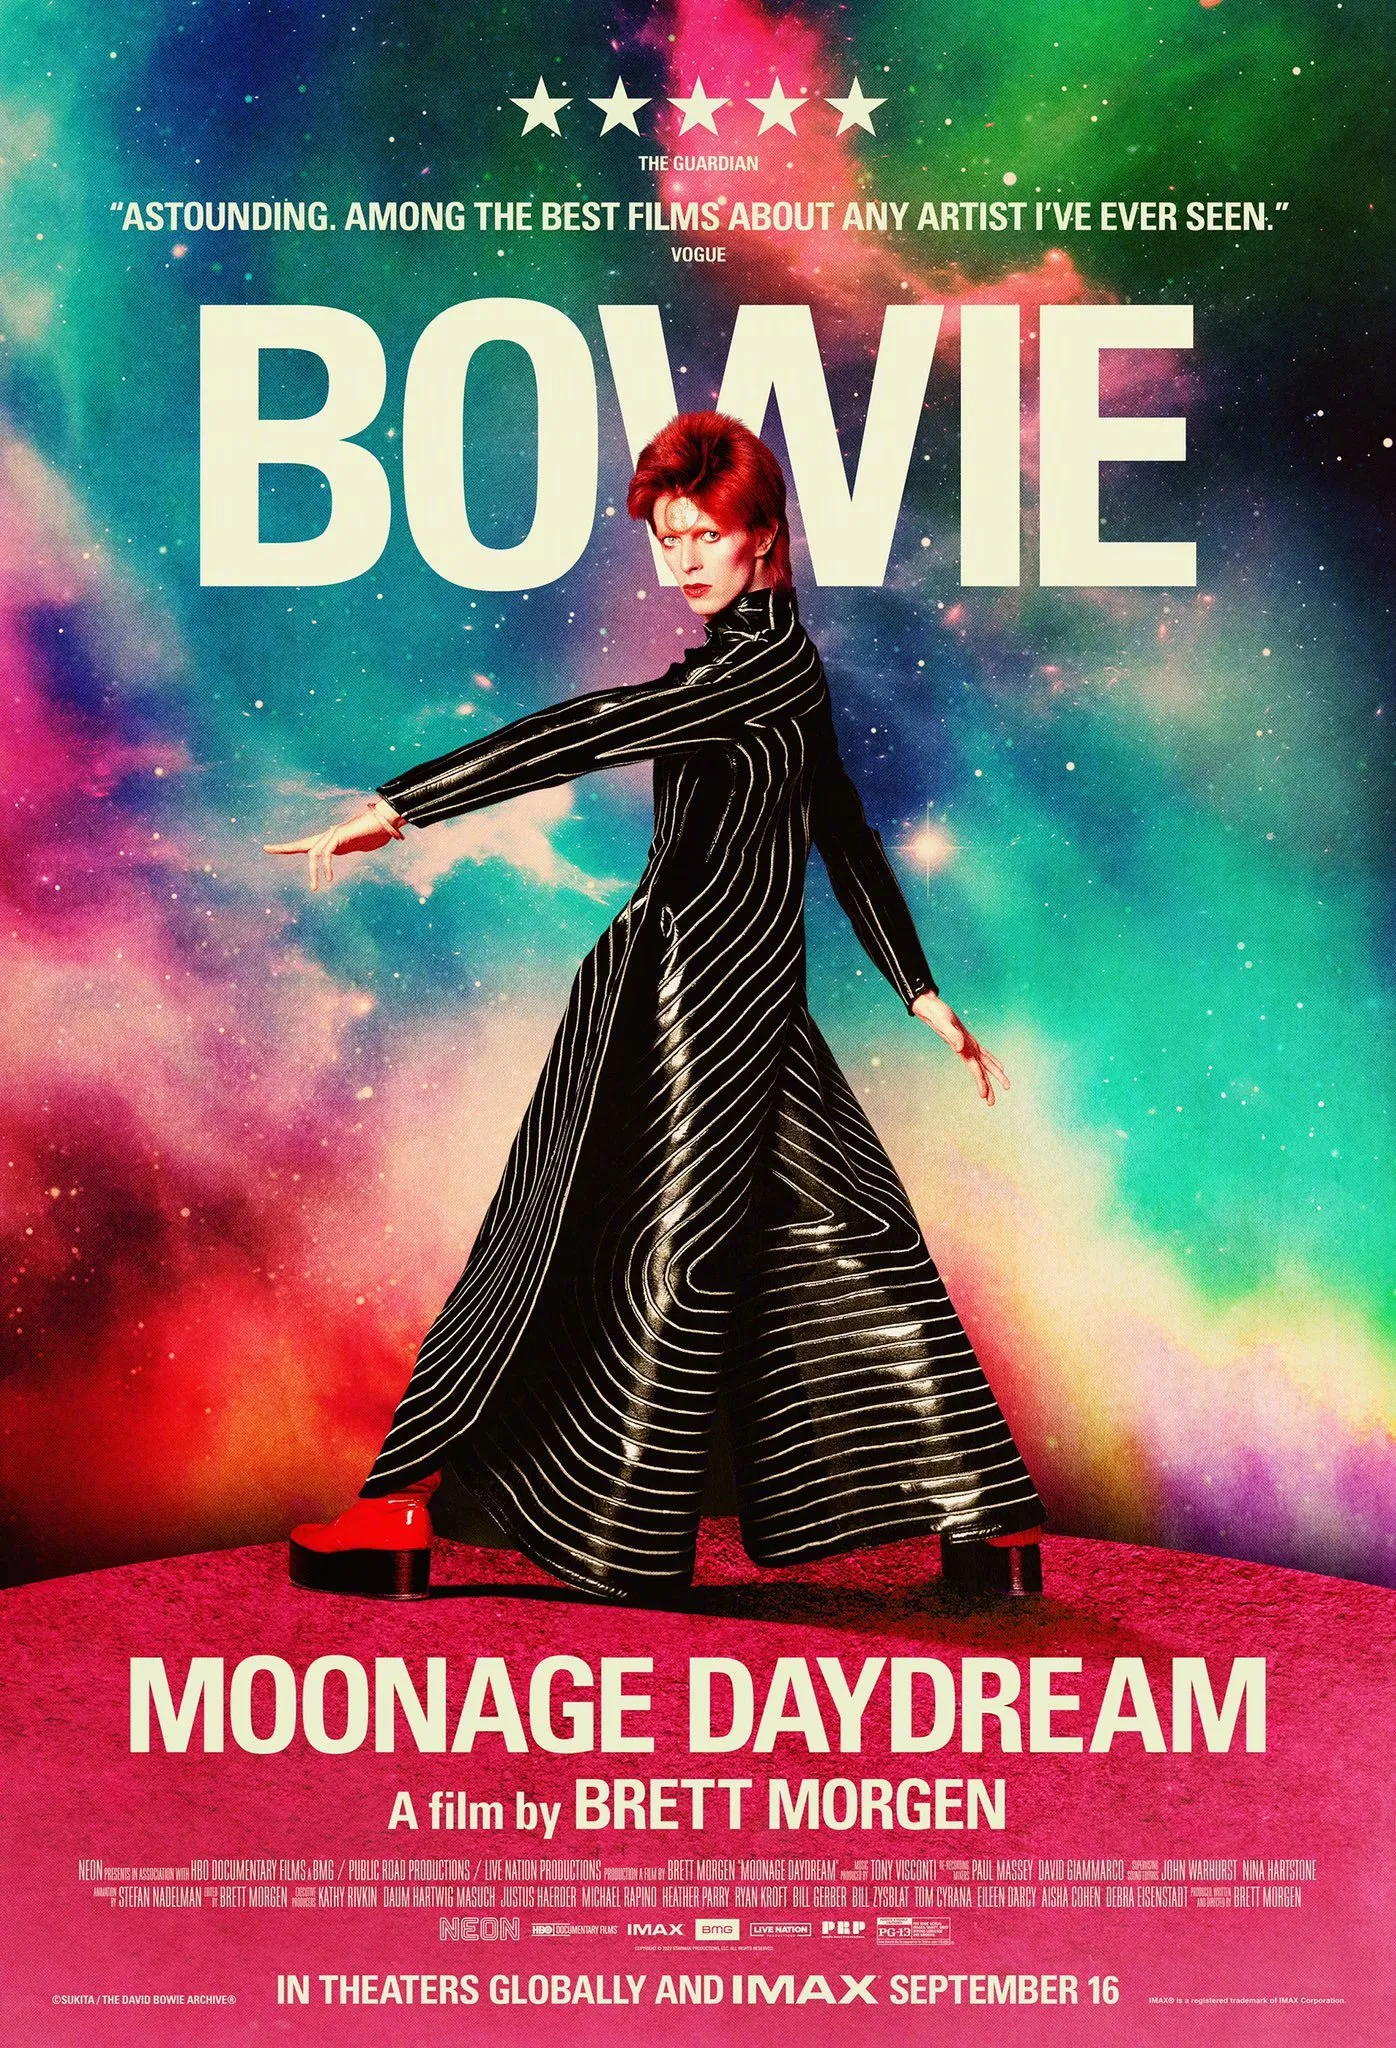 David Bowie's Documentary 'Moonage Daydream' Releases New Poster | FMV6